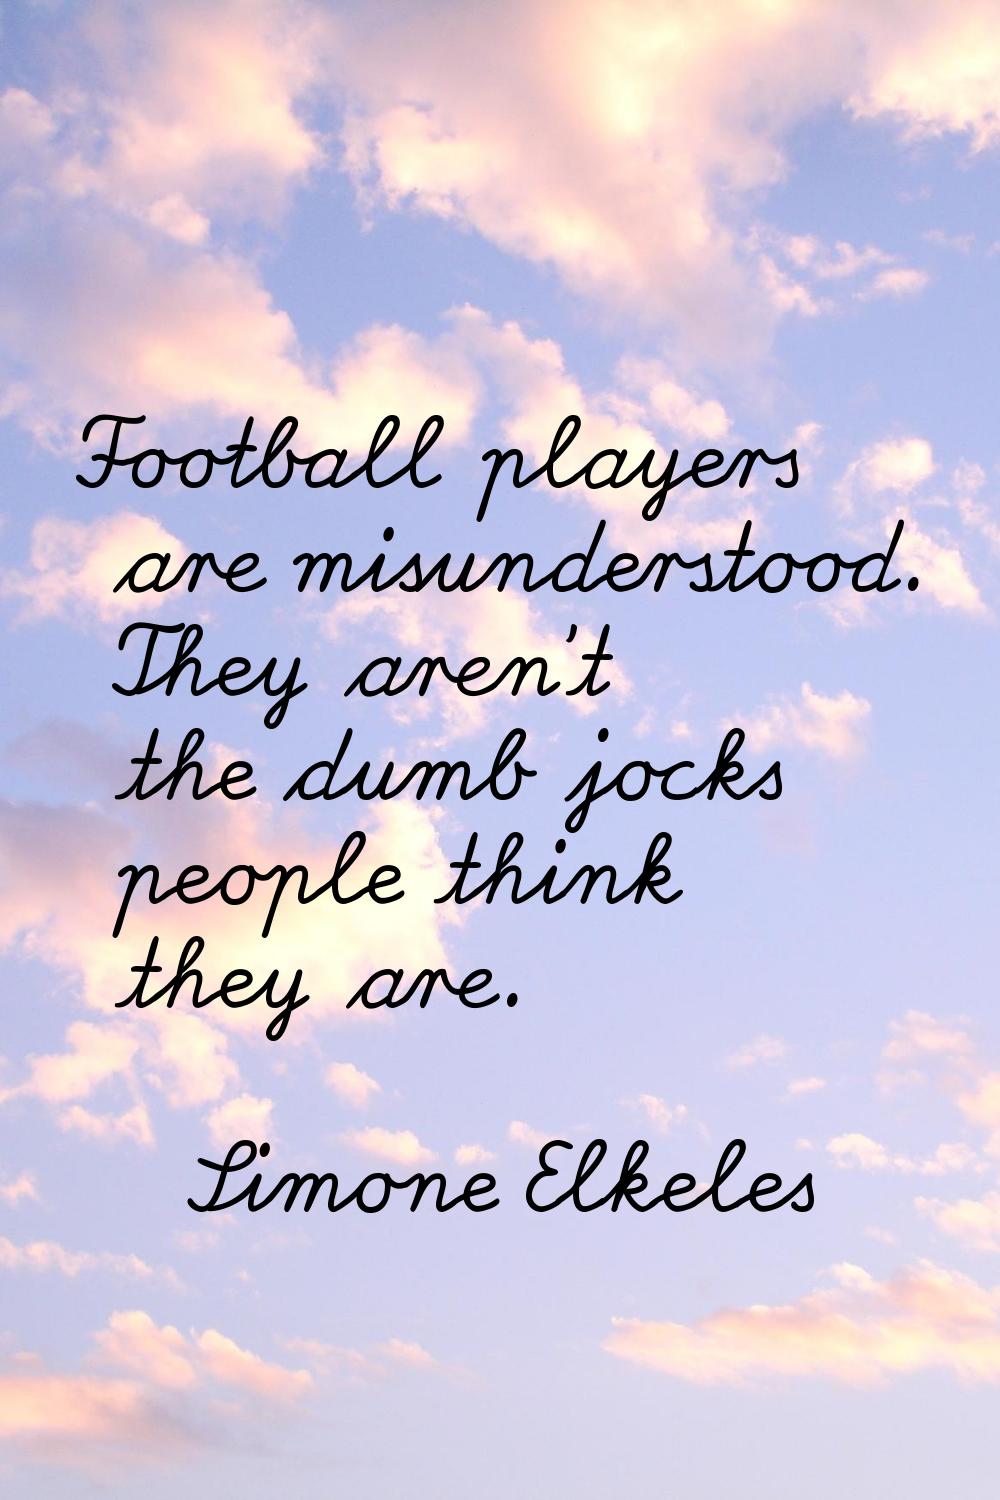 Football players are misunderstood. They aren't the dumb jocks people think they are.